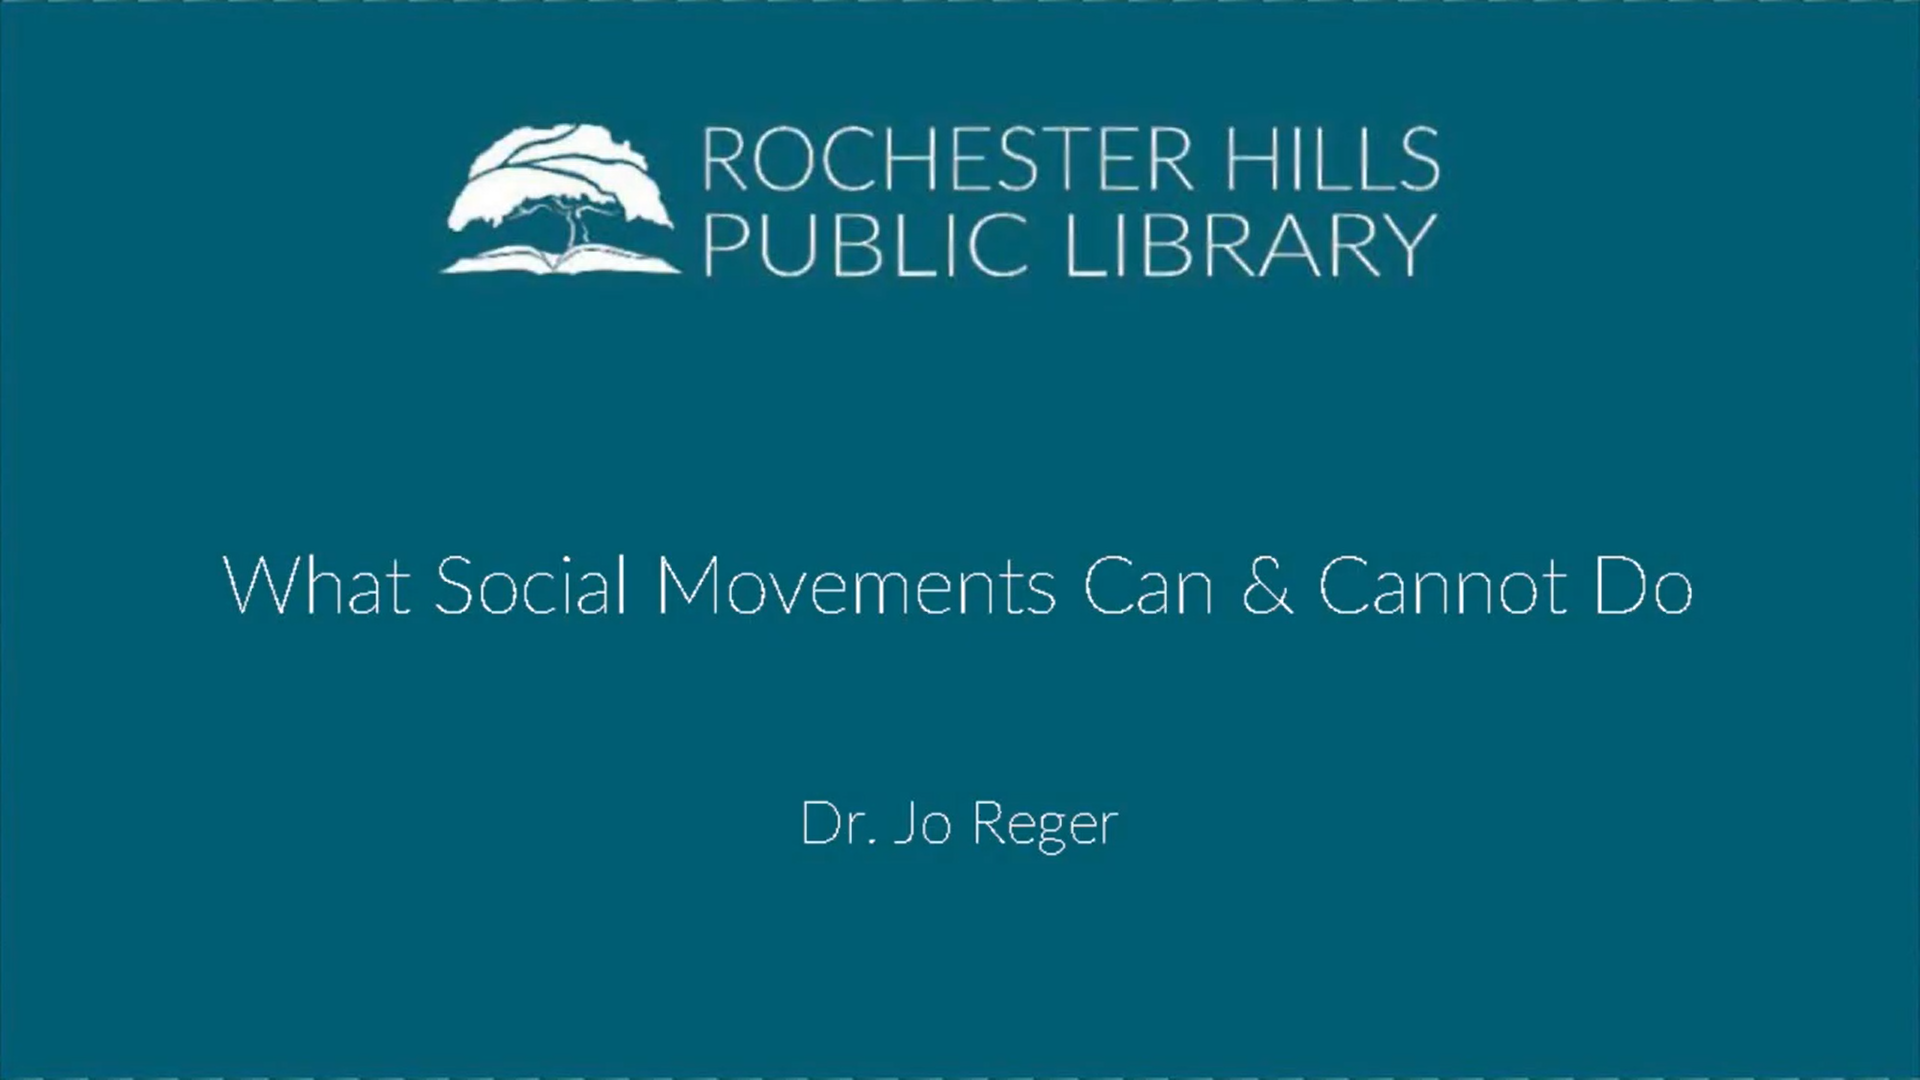 What Social Movements Can & Cannot Do